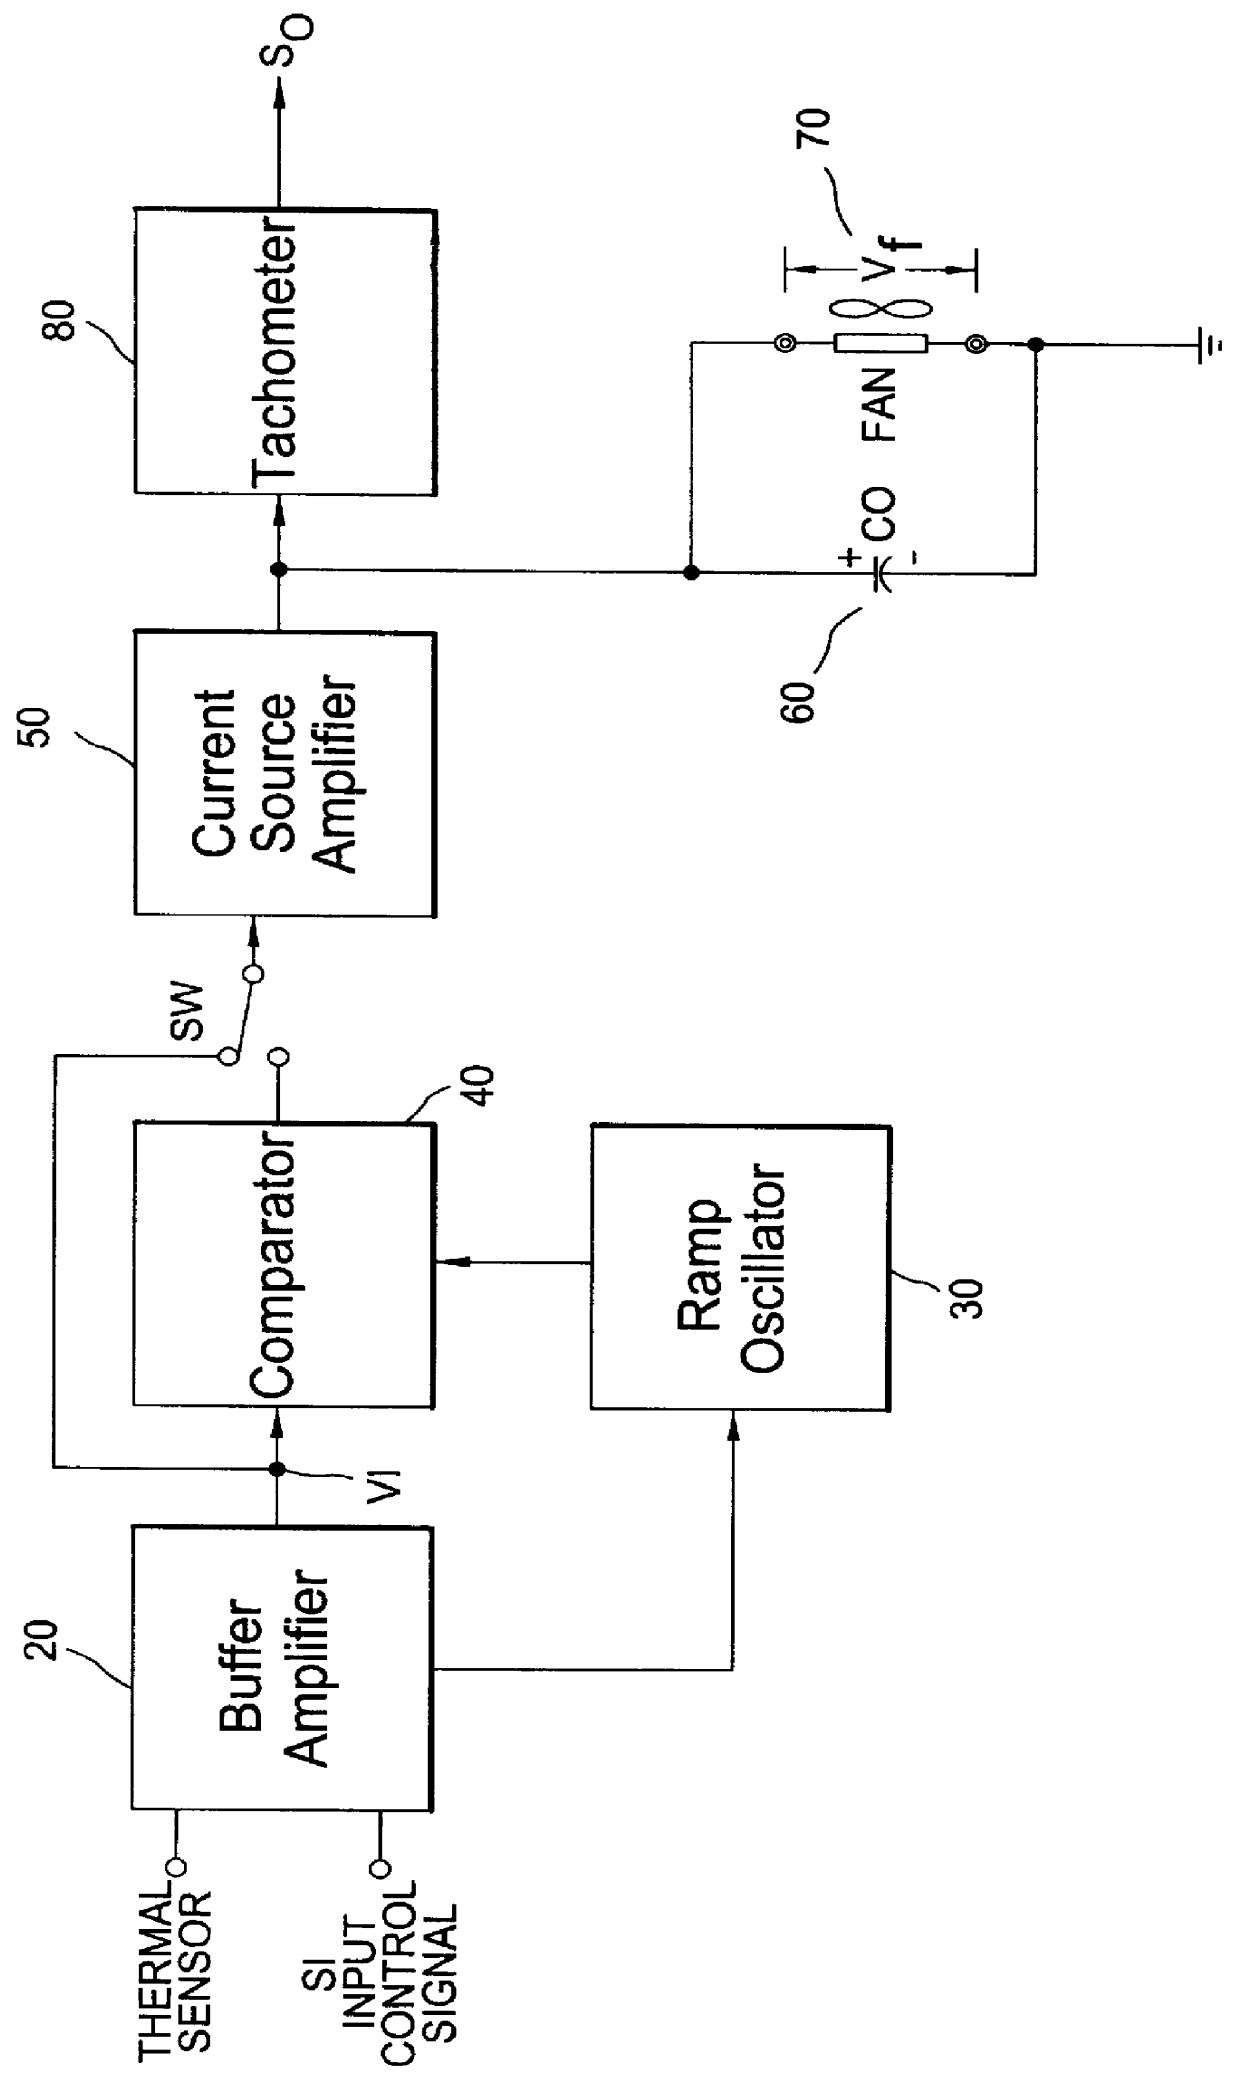 Interface apparatus for fan monitoring and control